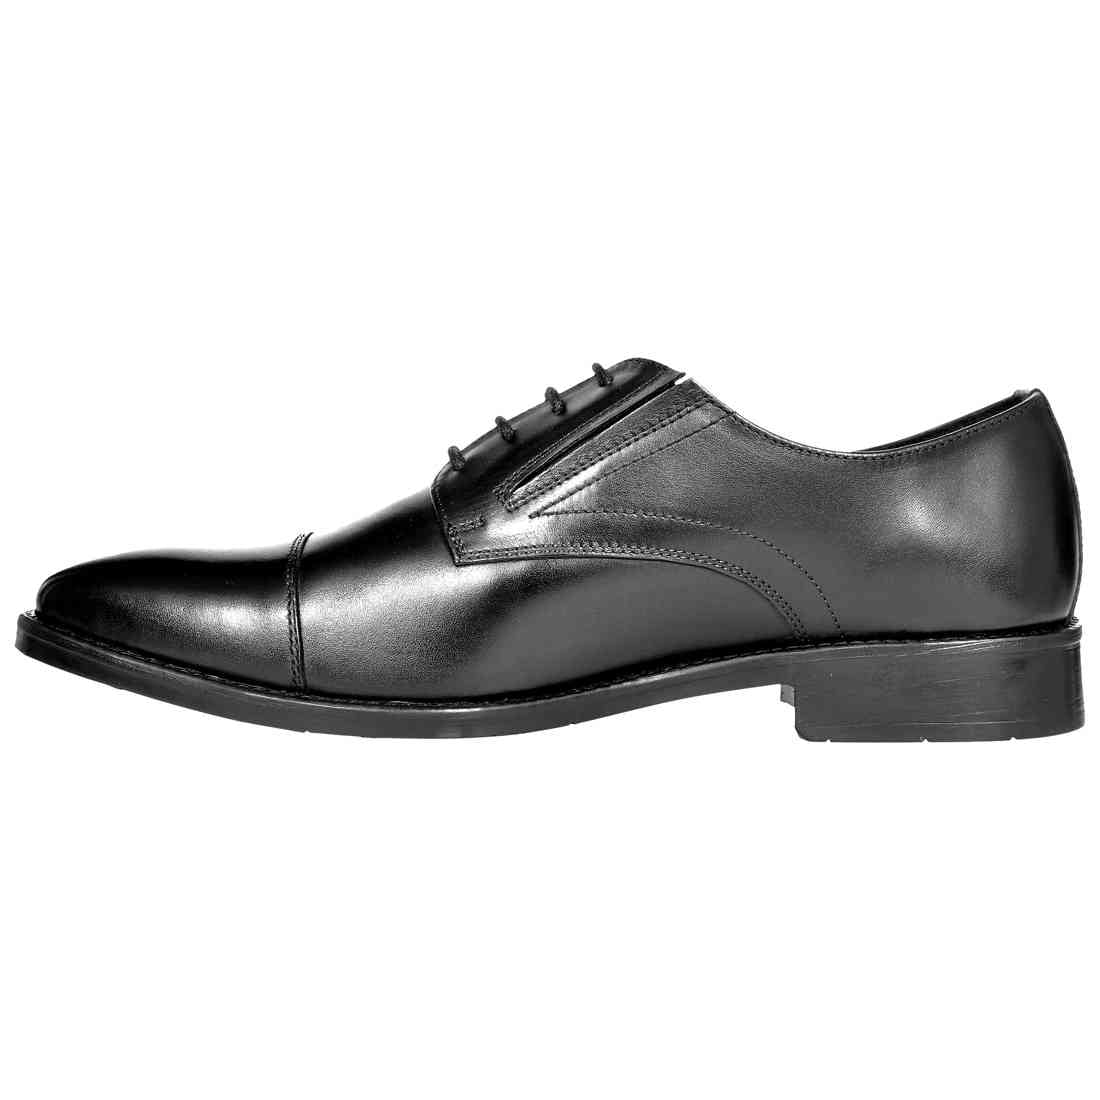 OHM New York Cap Toe Lace up Shoes with Slip-on Option